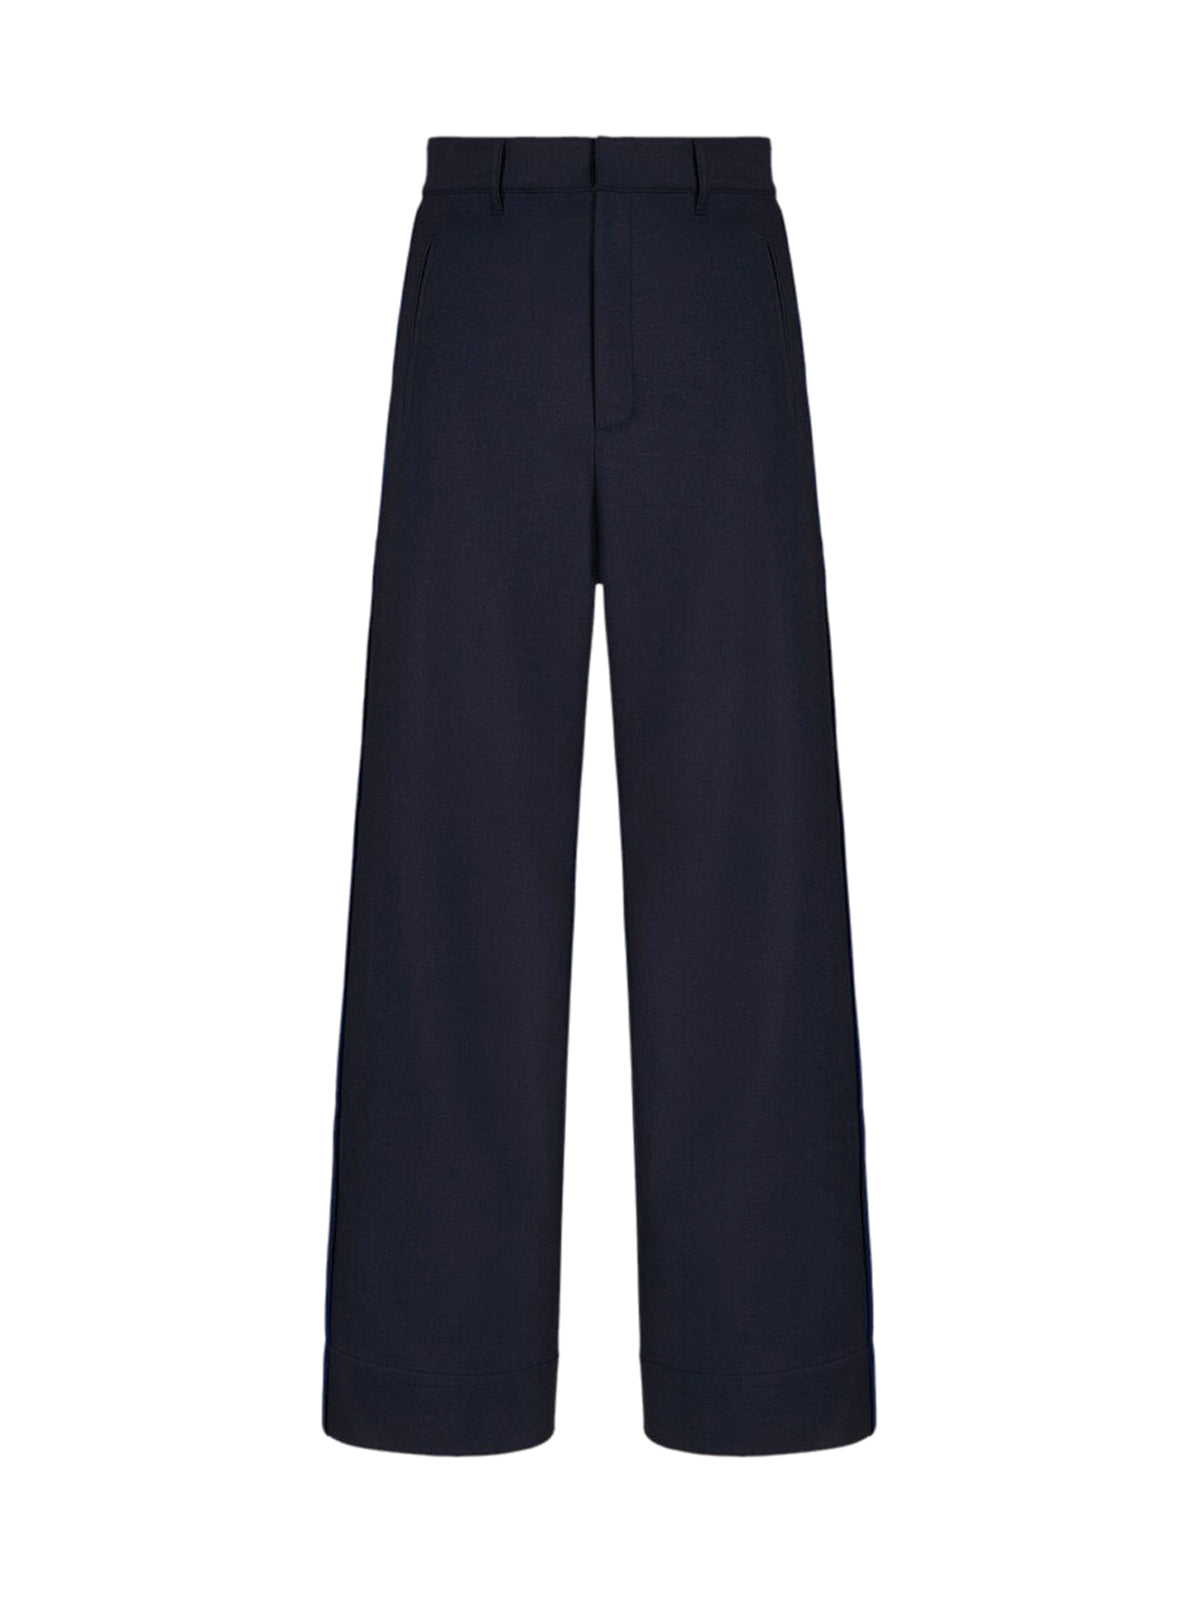 PALAZZO TROUSERS WITH OPEN SIDE IN CONTRAST